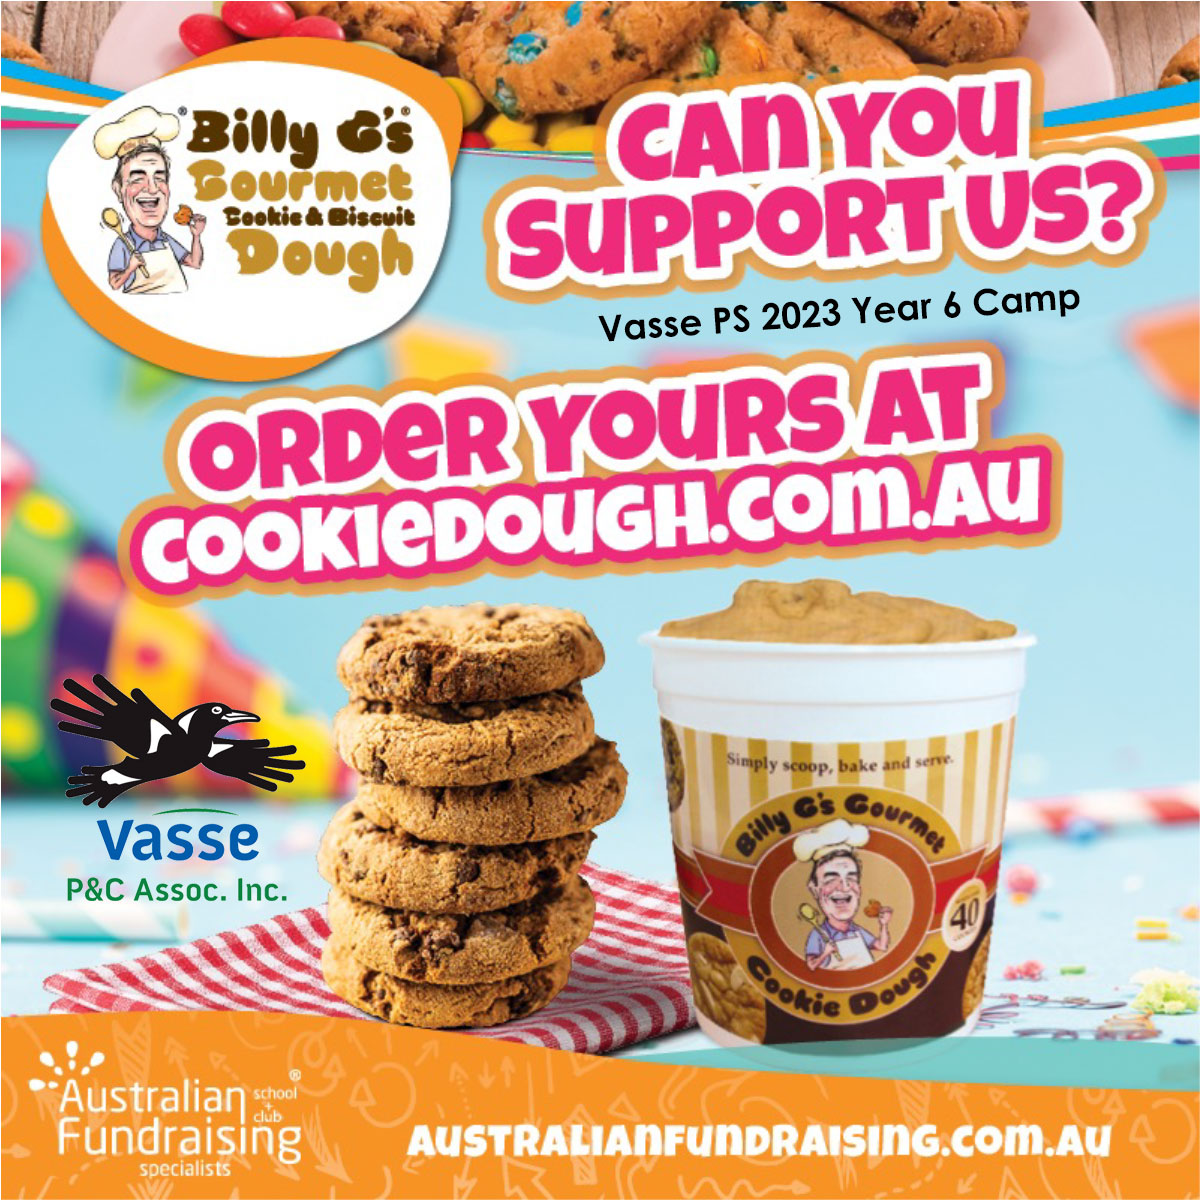 Last Orders! Cook Dough Fundraiser Closes Today 1